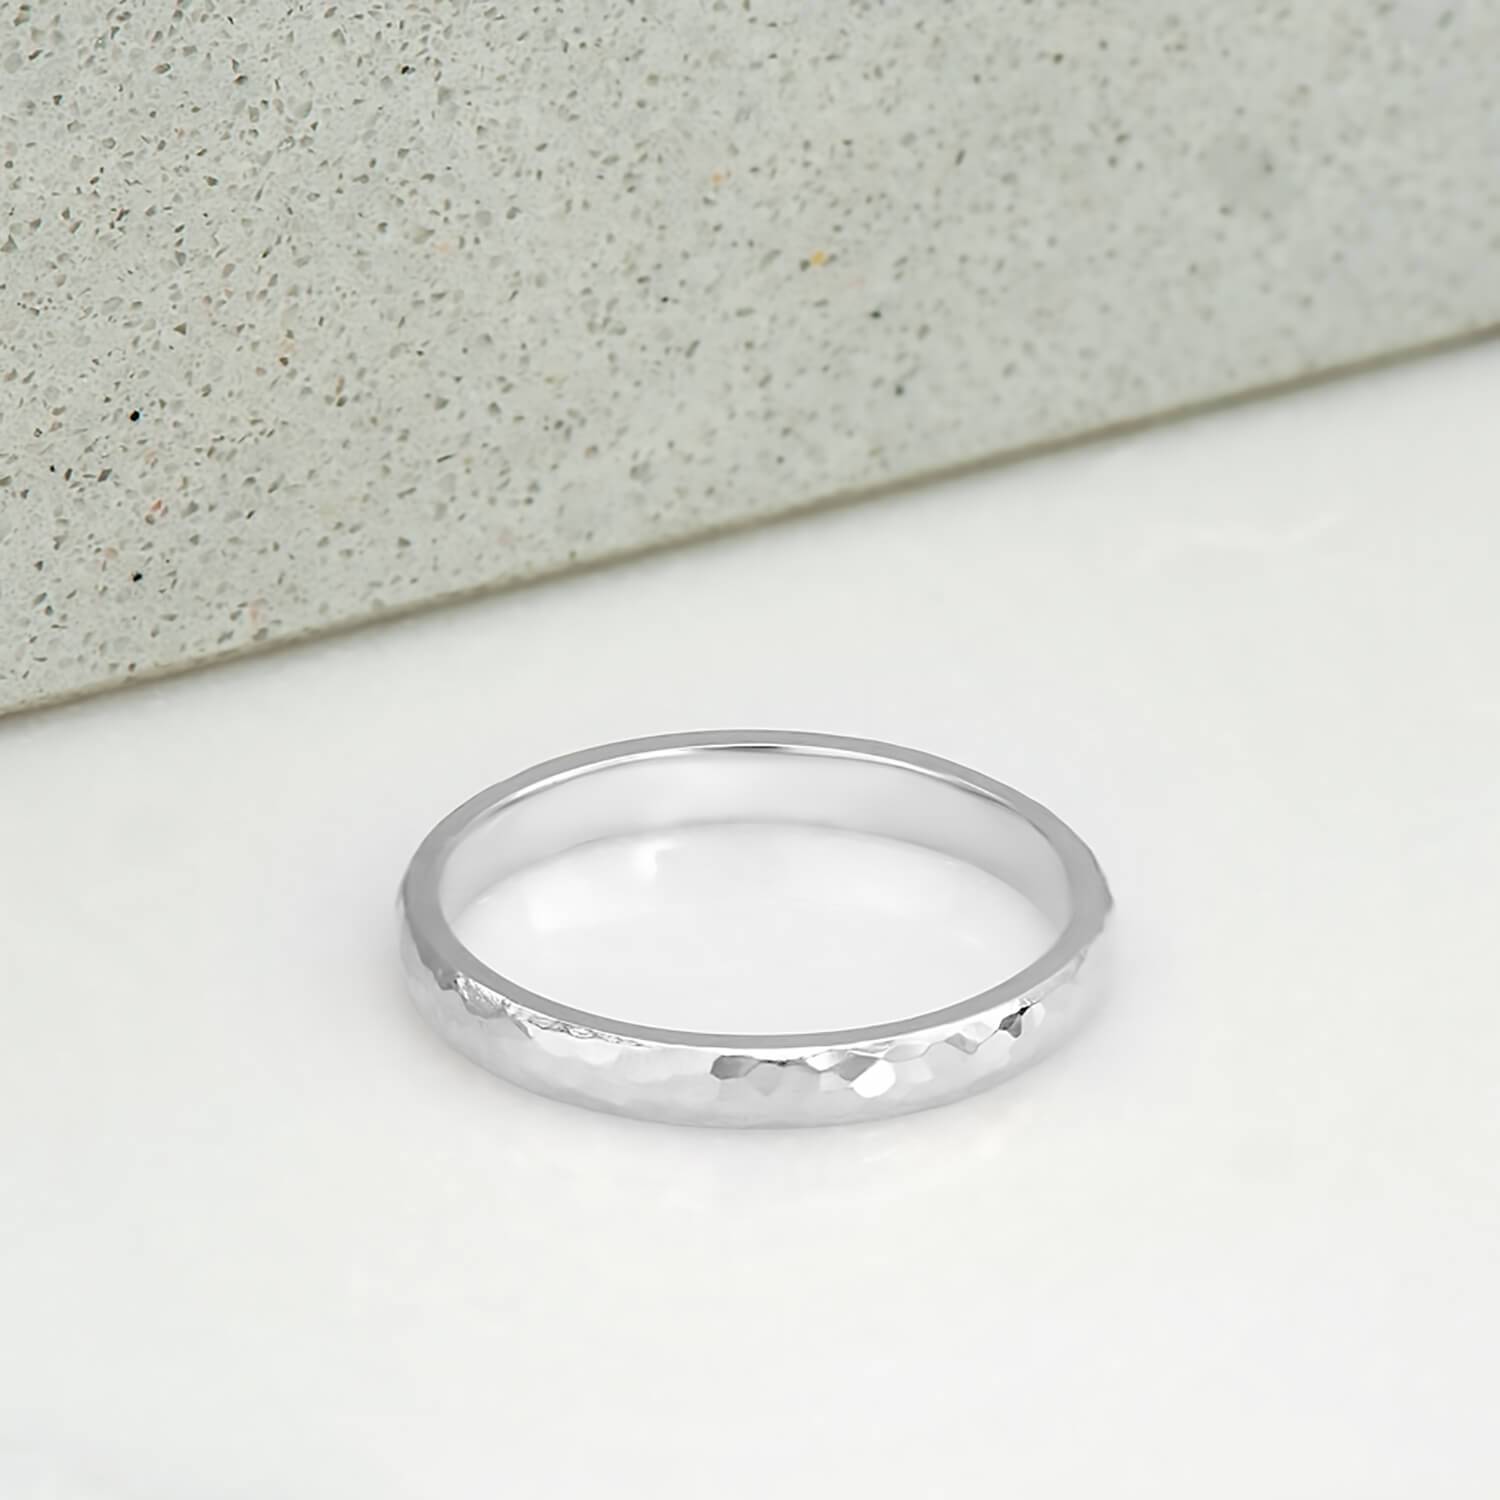 2 milimetre wide ring, polished and hammer finished, in 14 karat recycled white gold.